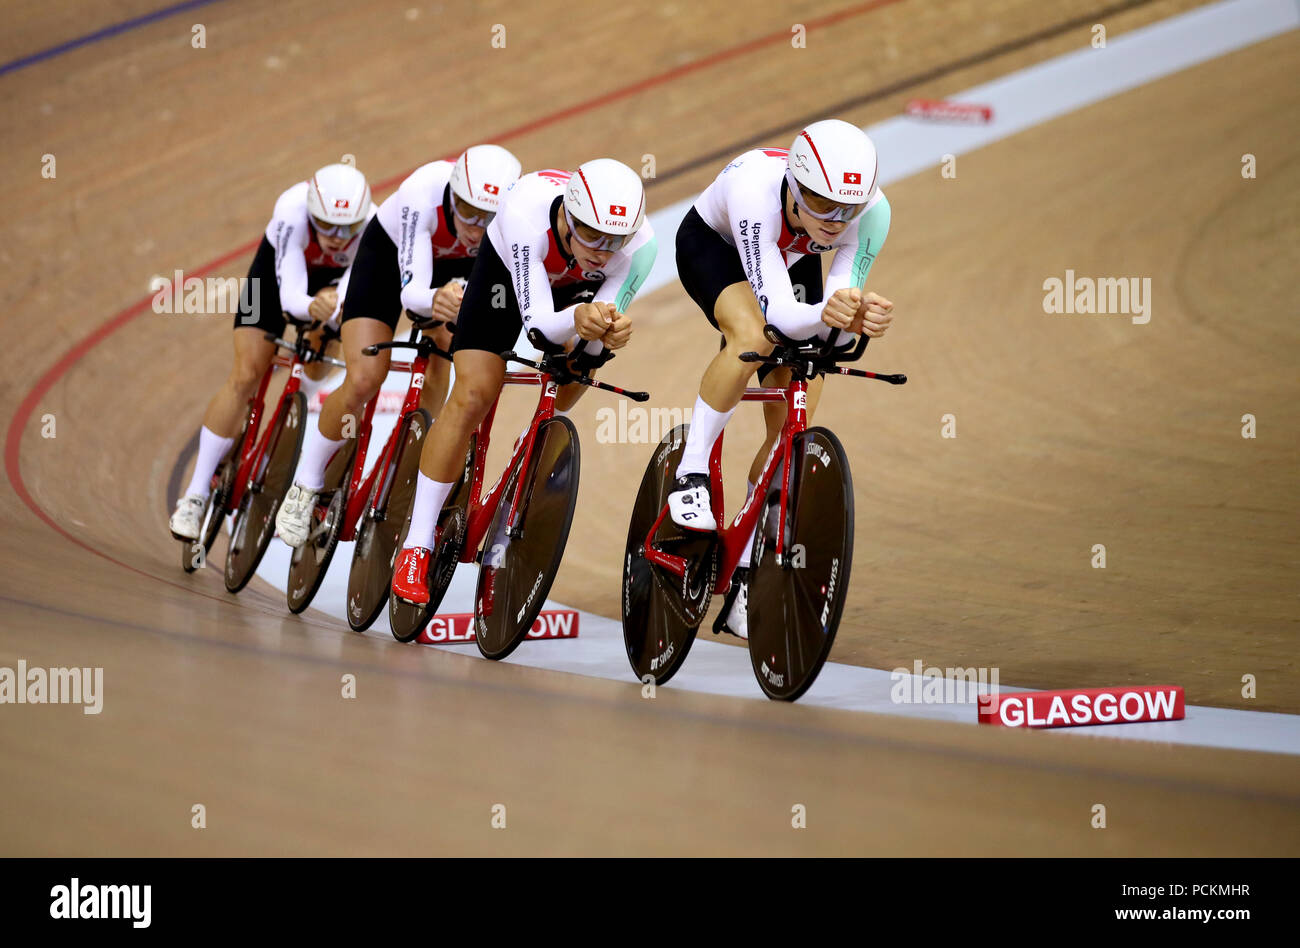 Switzerland Men Team Pursuit led by Frank Pasche in qualifying during day one of the 2018 European Championships at the Sir Chris Hoy Velodrome, Glasgow. PRESS ASSOCIATION Photo. Picture date: Thursday August 2, 2018. See PA story SPORT European. Photo credit should read: John Walton/PA Wire. during day one of the 2018 European Championships at the Sir Chris Hoy Velodrome, Glasgow. PRESS ASSOCIATION Photo. Picture date: Thursday August 2, 2018. See PA story SPORT European. Photo credit should read: John Walton/PA Wire. Stock Photo